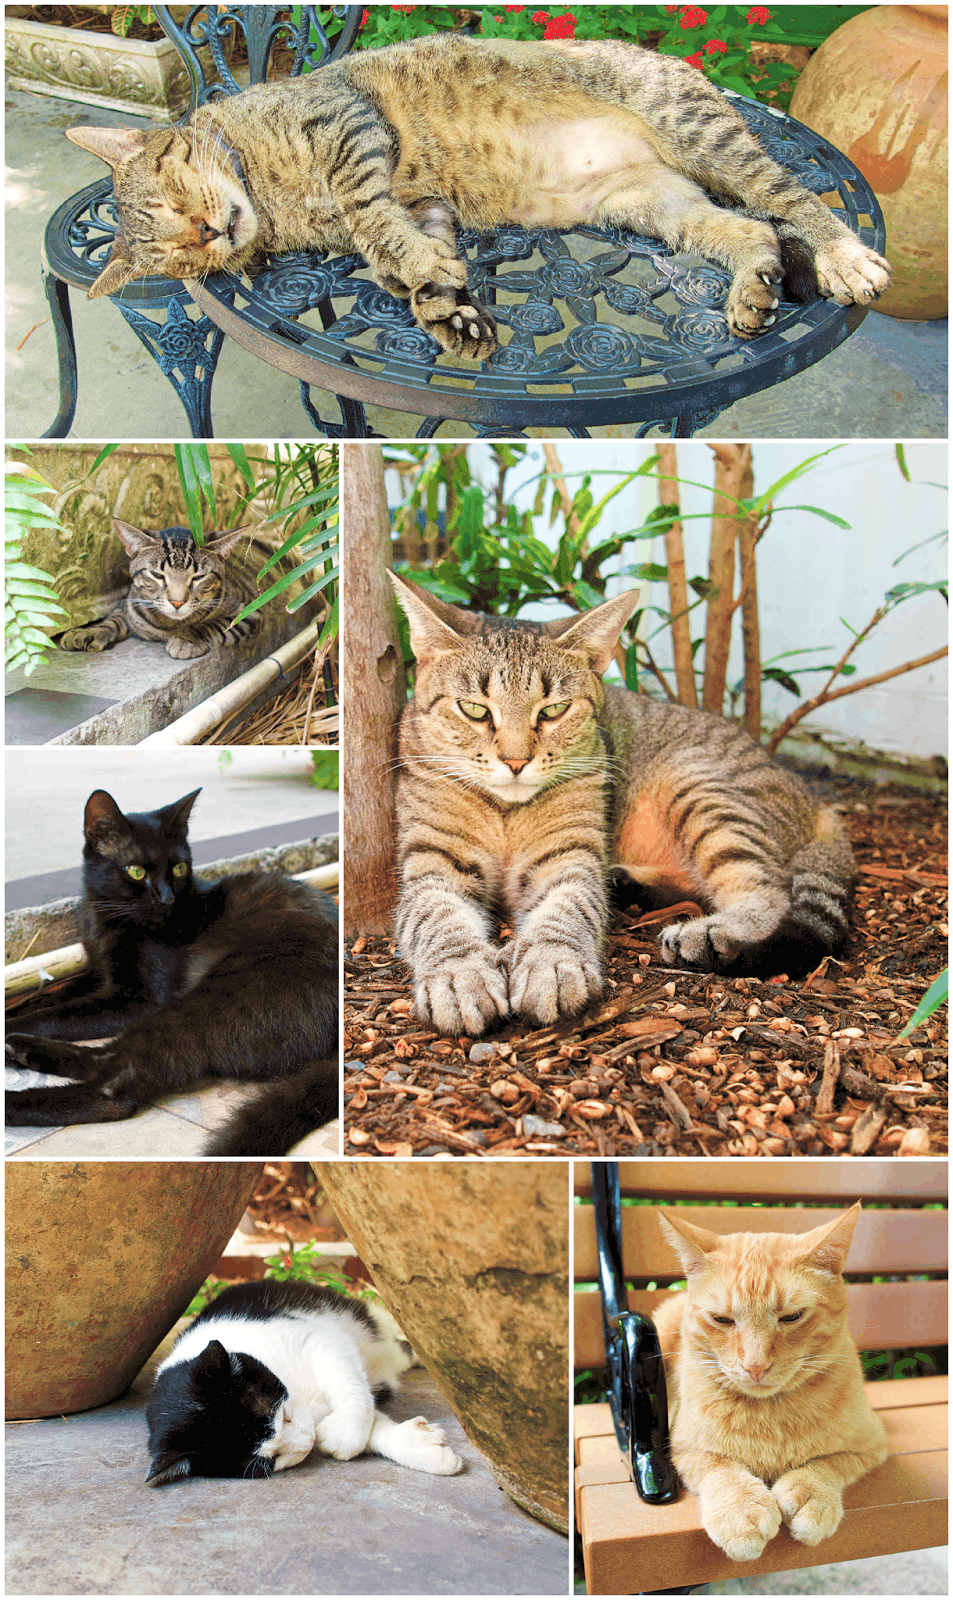 Hemingway Cats with 6 toes - Key West, FL